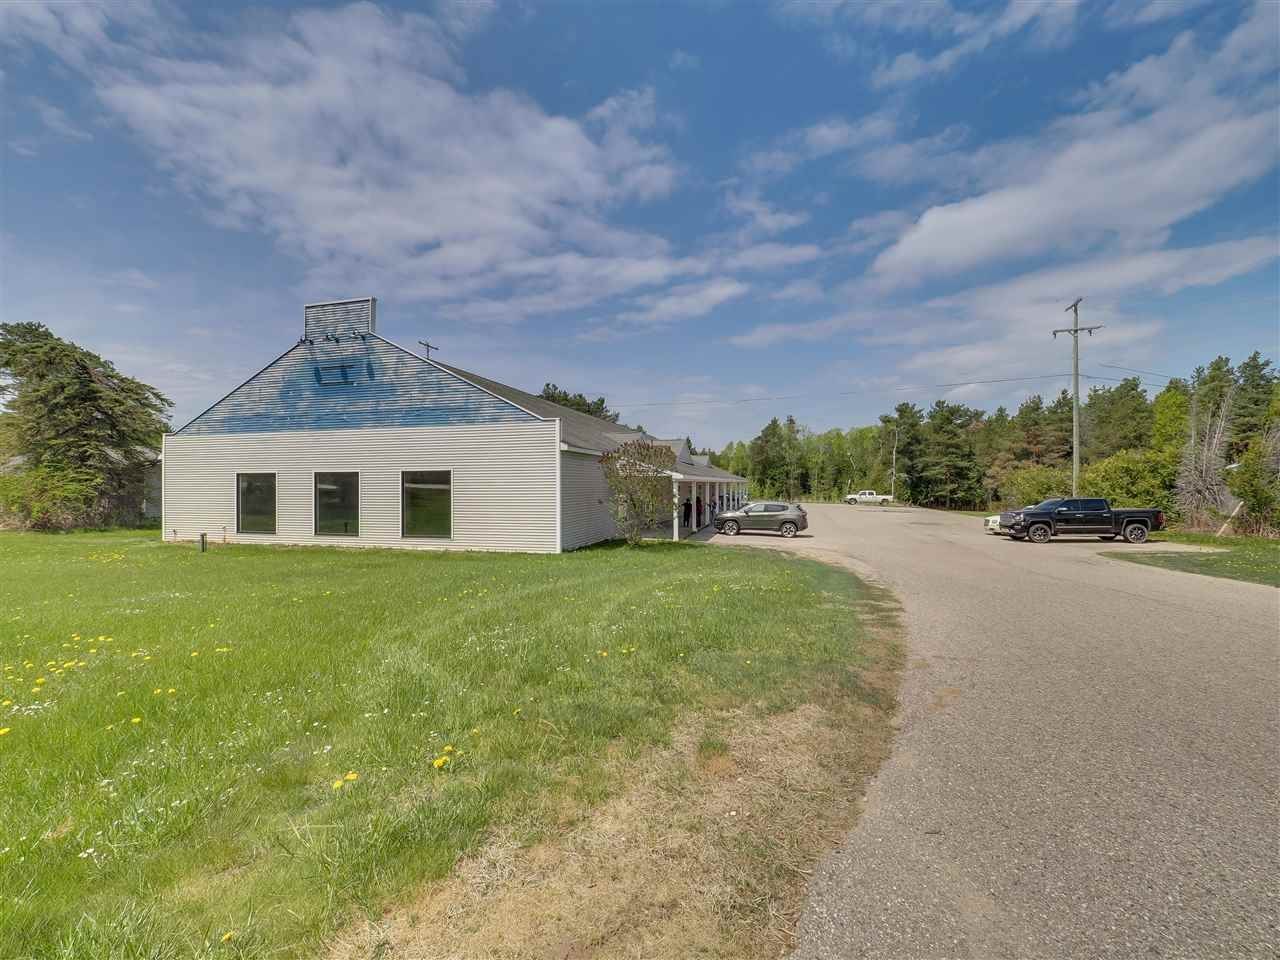 35. Commercial for Sale at 2049 & 2057 N US 31 Highway Petoskey, Michigan 49770 United States